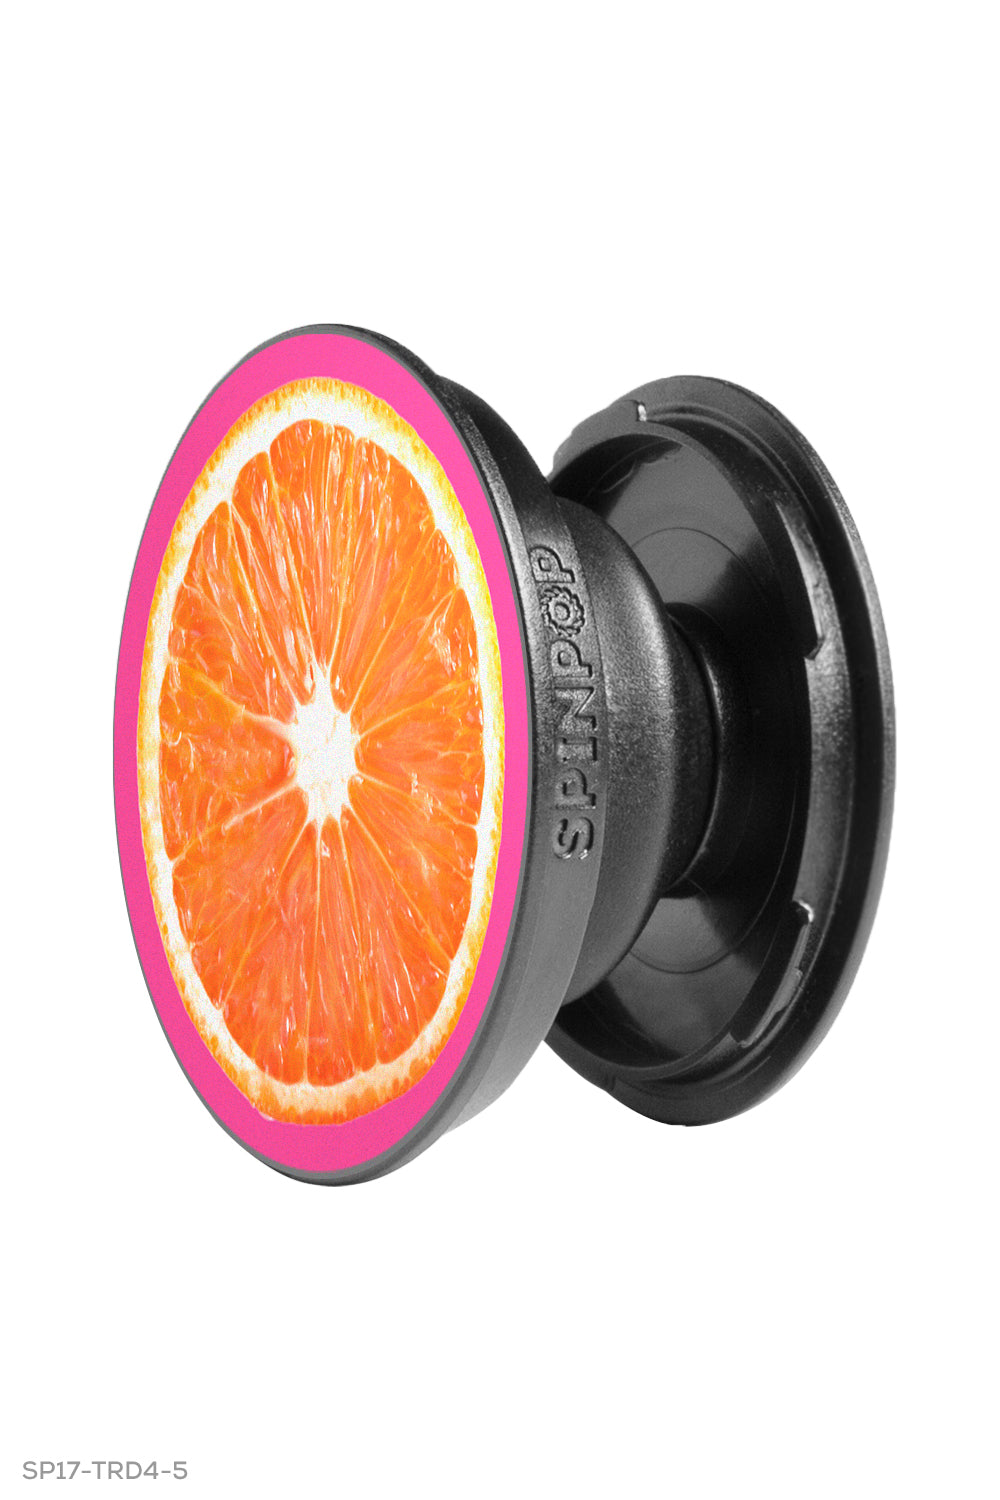 Spin Pop: Expanding Stand and Grip for Smartphones and Tablets - Orange Slices